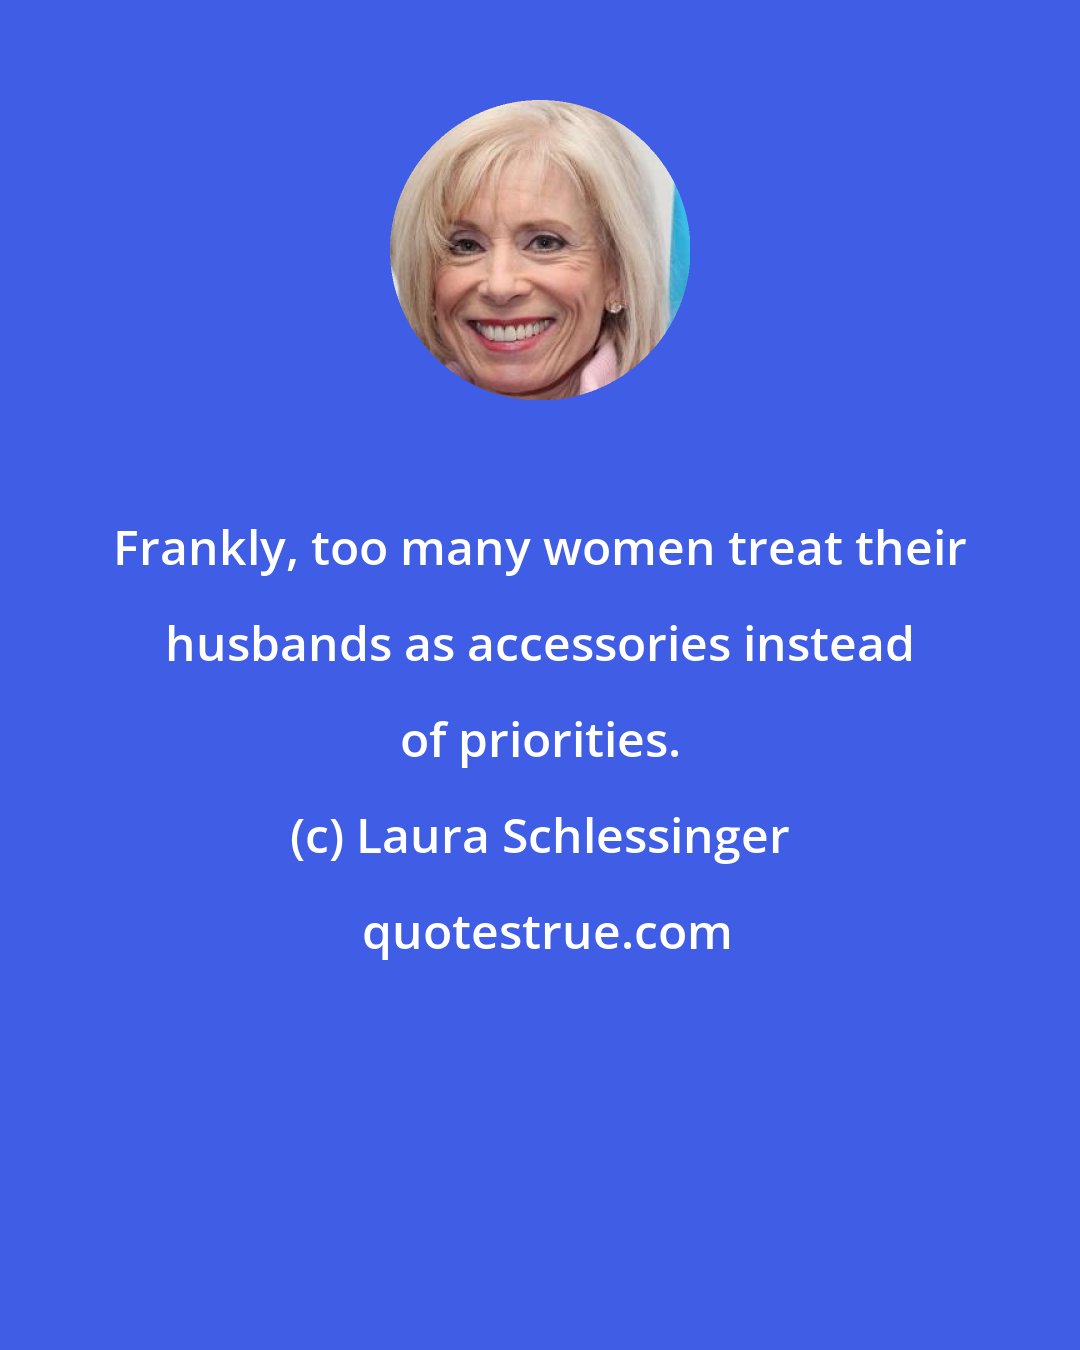 Laura Schlessinger: Frankly, too many women treat their husbands as accessories instead of priorities.